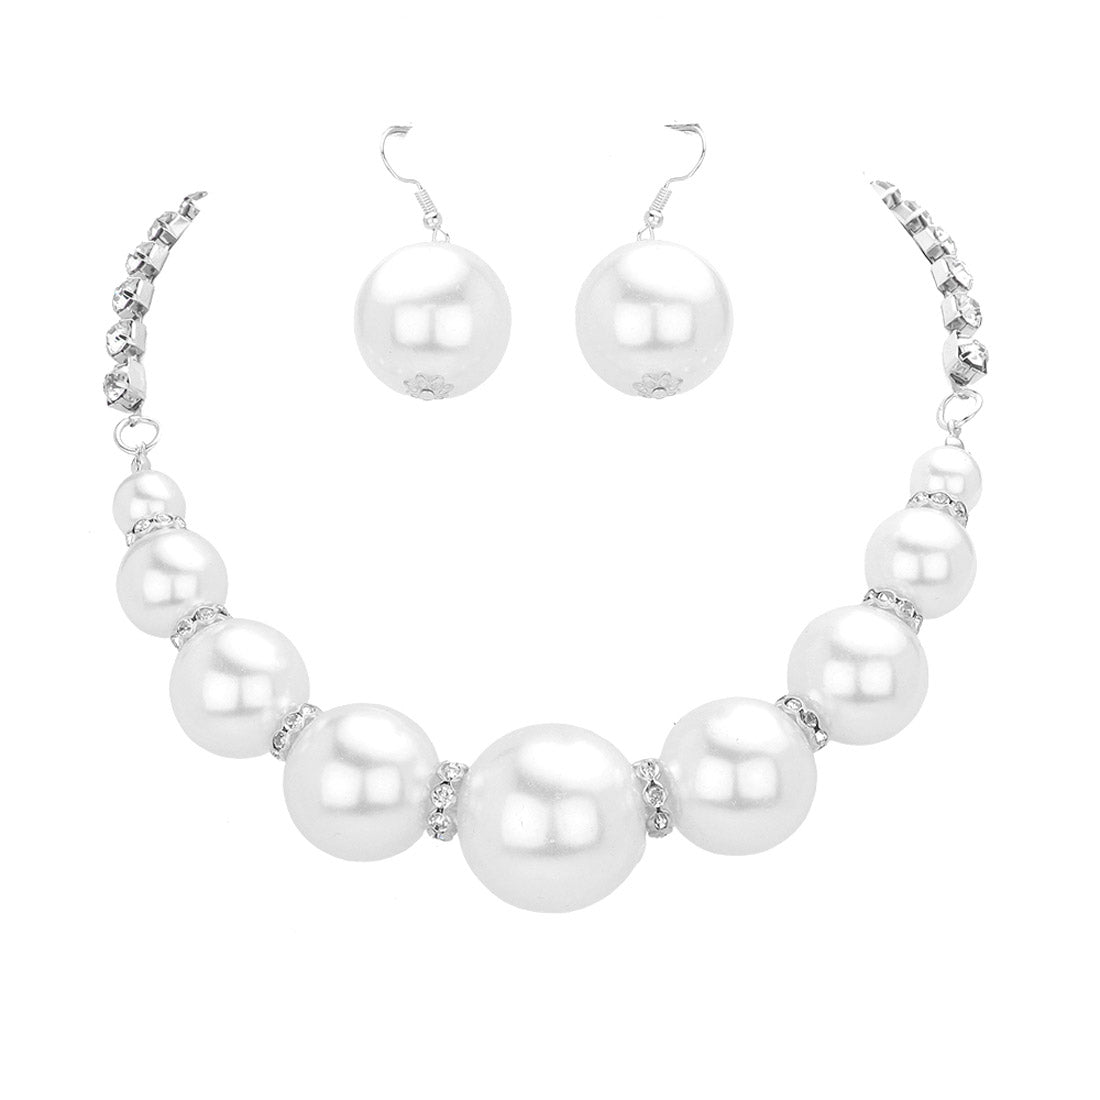 Silver, Clear, White Multi Sized Pearl Round Stone Necklace Earring Set is boasting an exquisite range of pearls of varying sizes, this necklace will add a gorgeous touch of class and sophistication to any outfit. Perfect for parties, Weddings, Birthday Gift, Anniversary, Christmas Gift, Regalos de: Cumpleanos, Navidad, Anniversario, etc